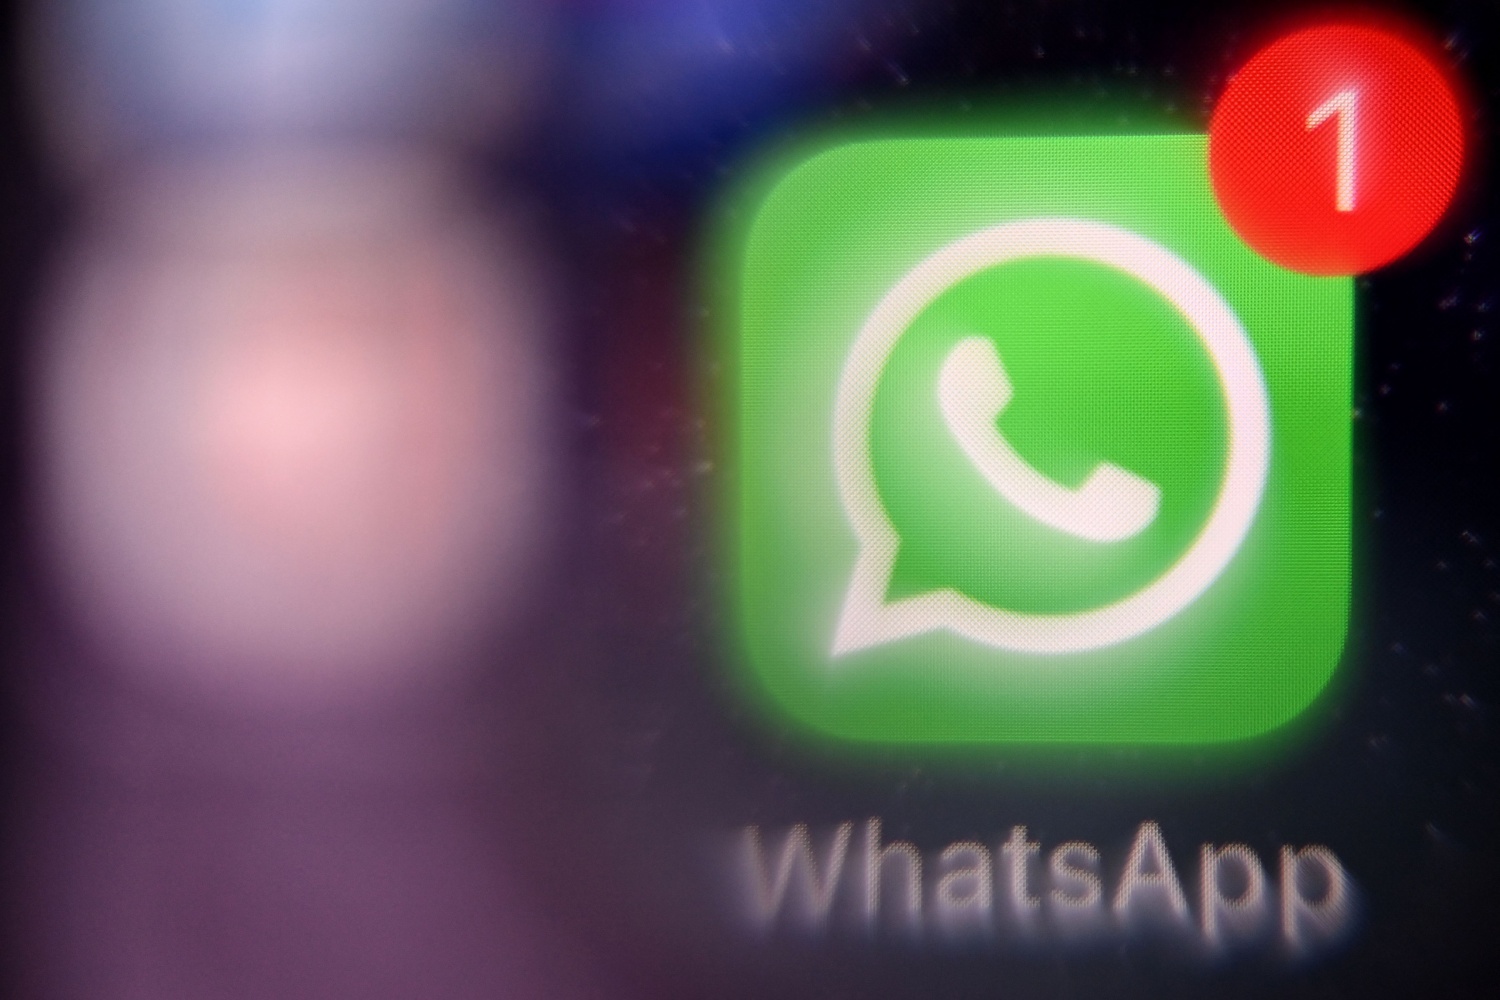 “WhatsApp Brings Out ‘Keep in Chat’ Feature Allowing Users to Save Disappearing Messages